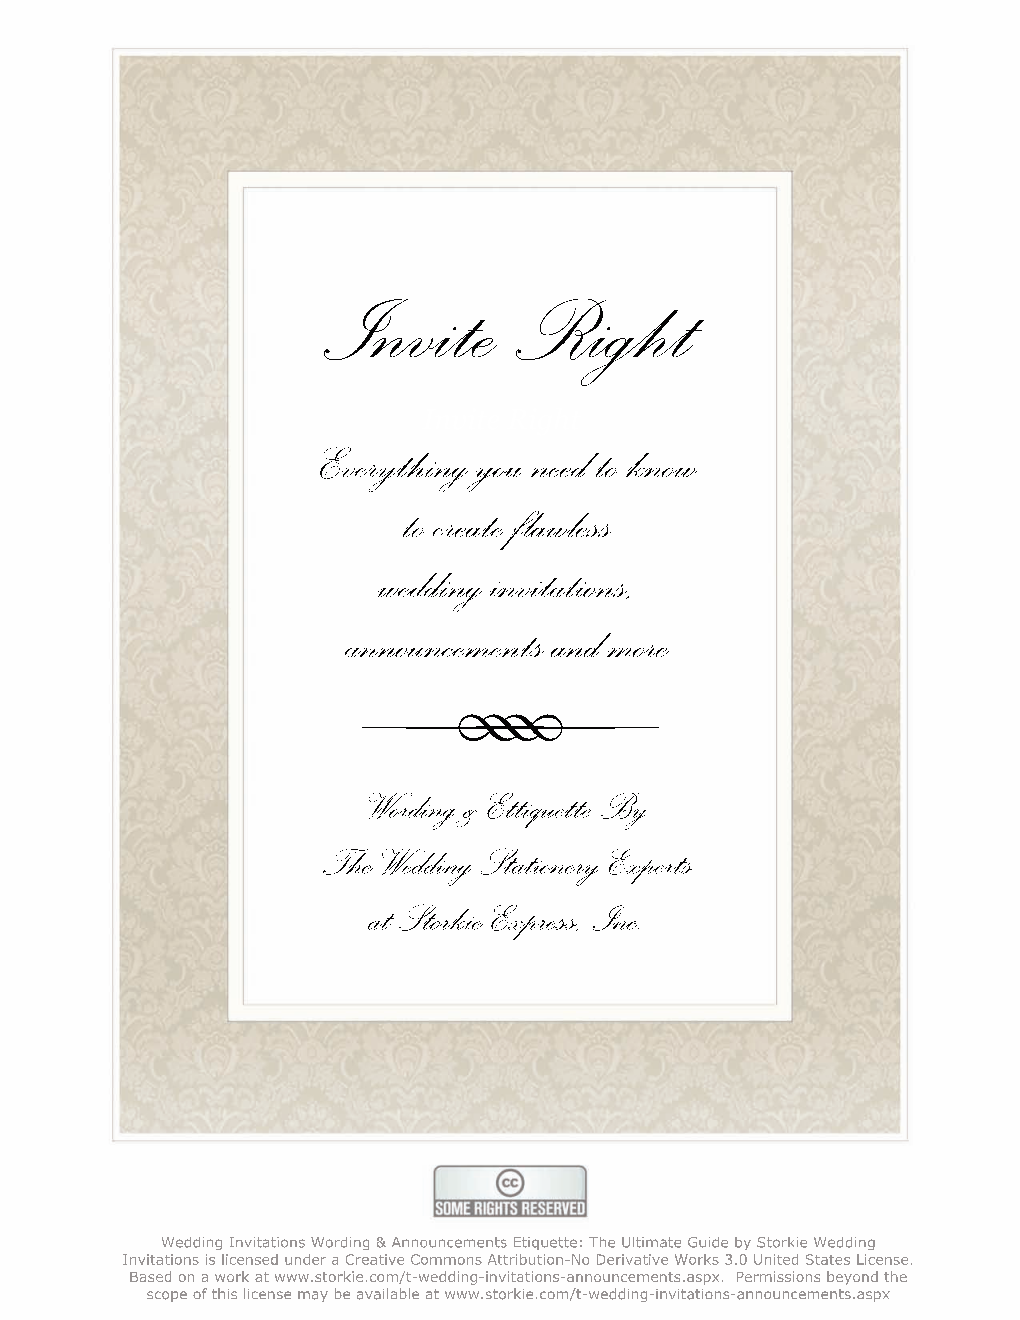 Wedding Invitations Etiquette by Storkie